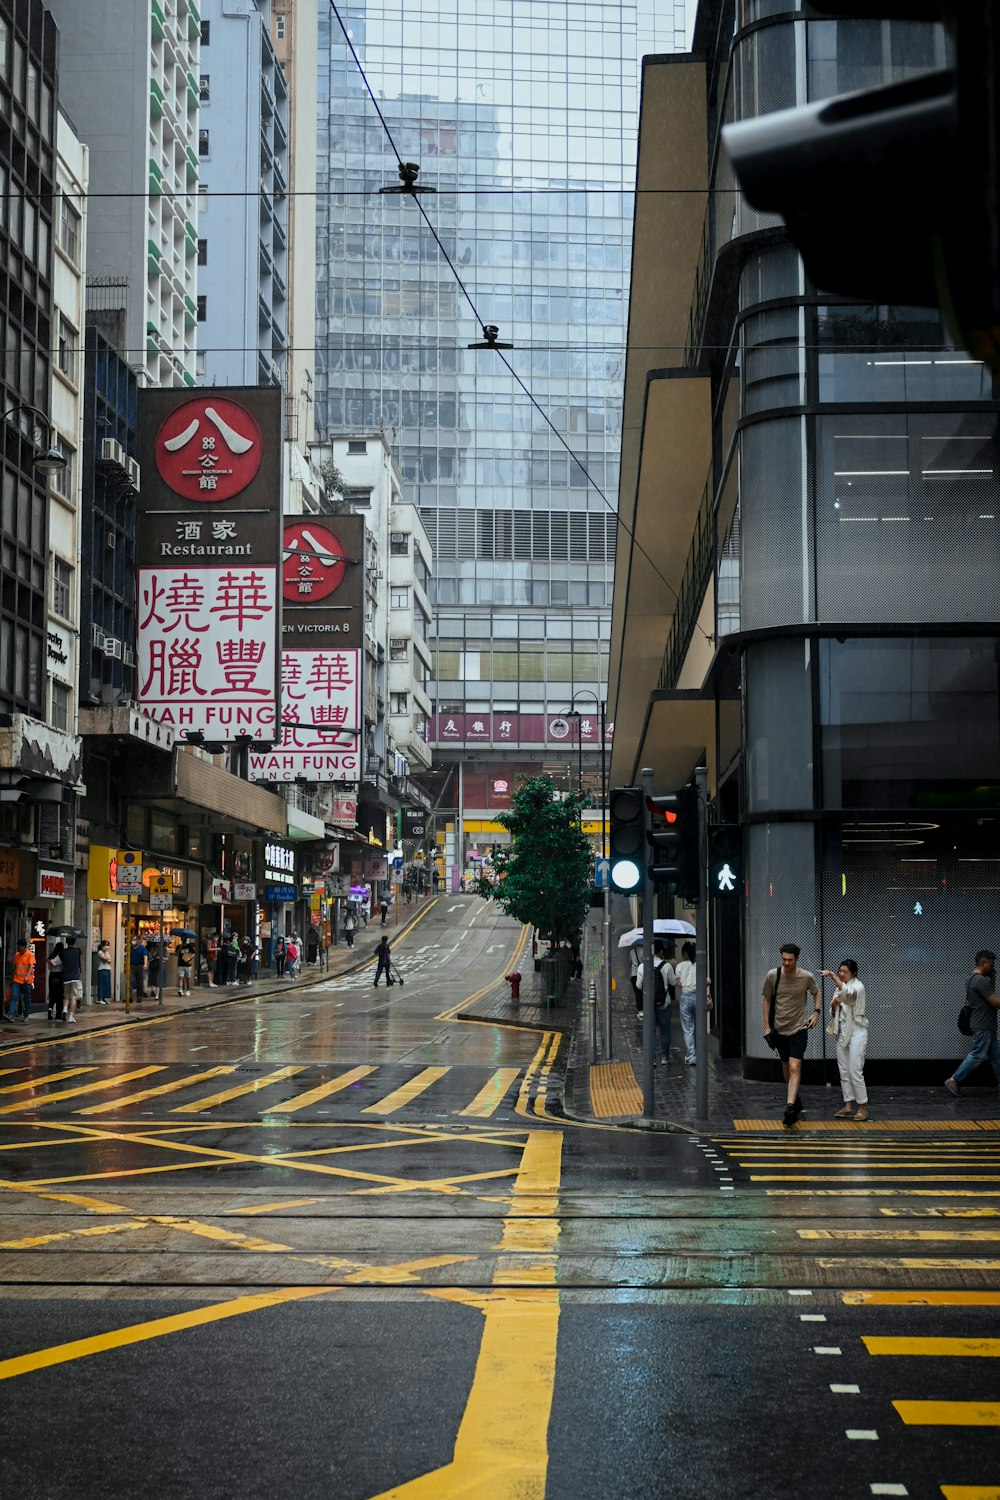 a wet city street with people walking on it